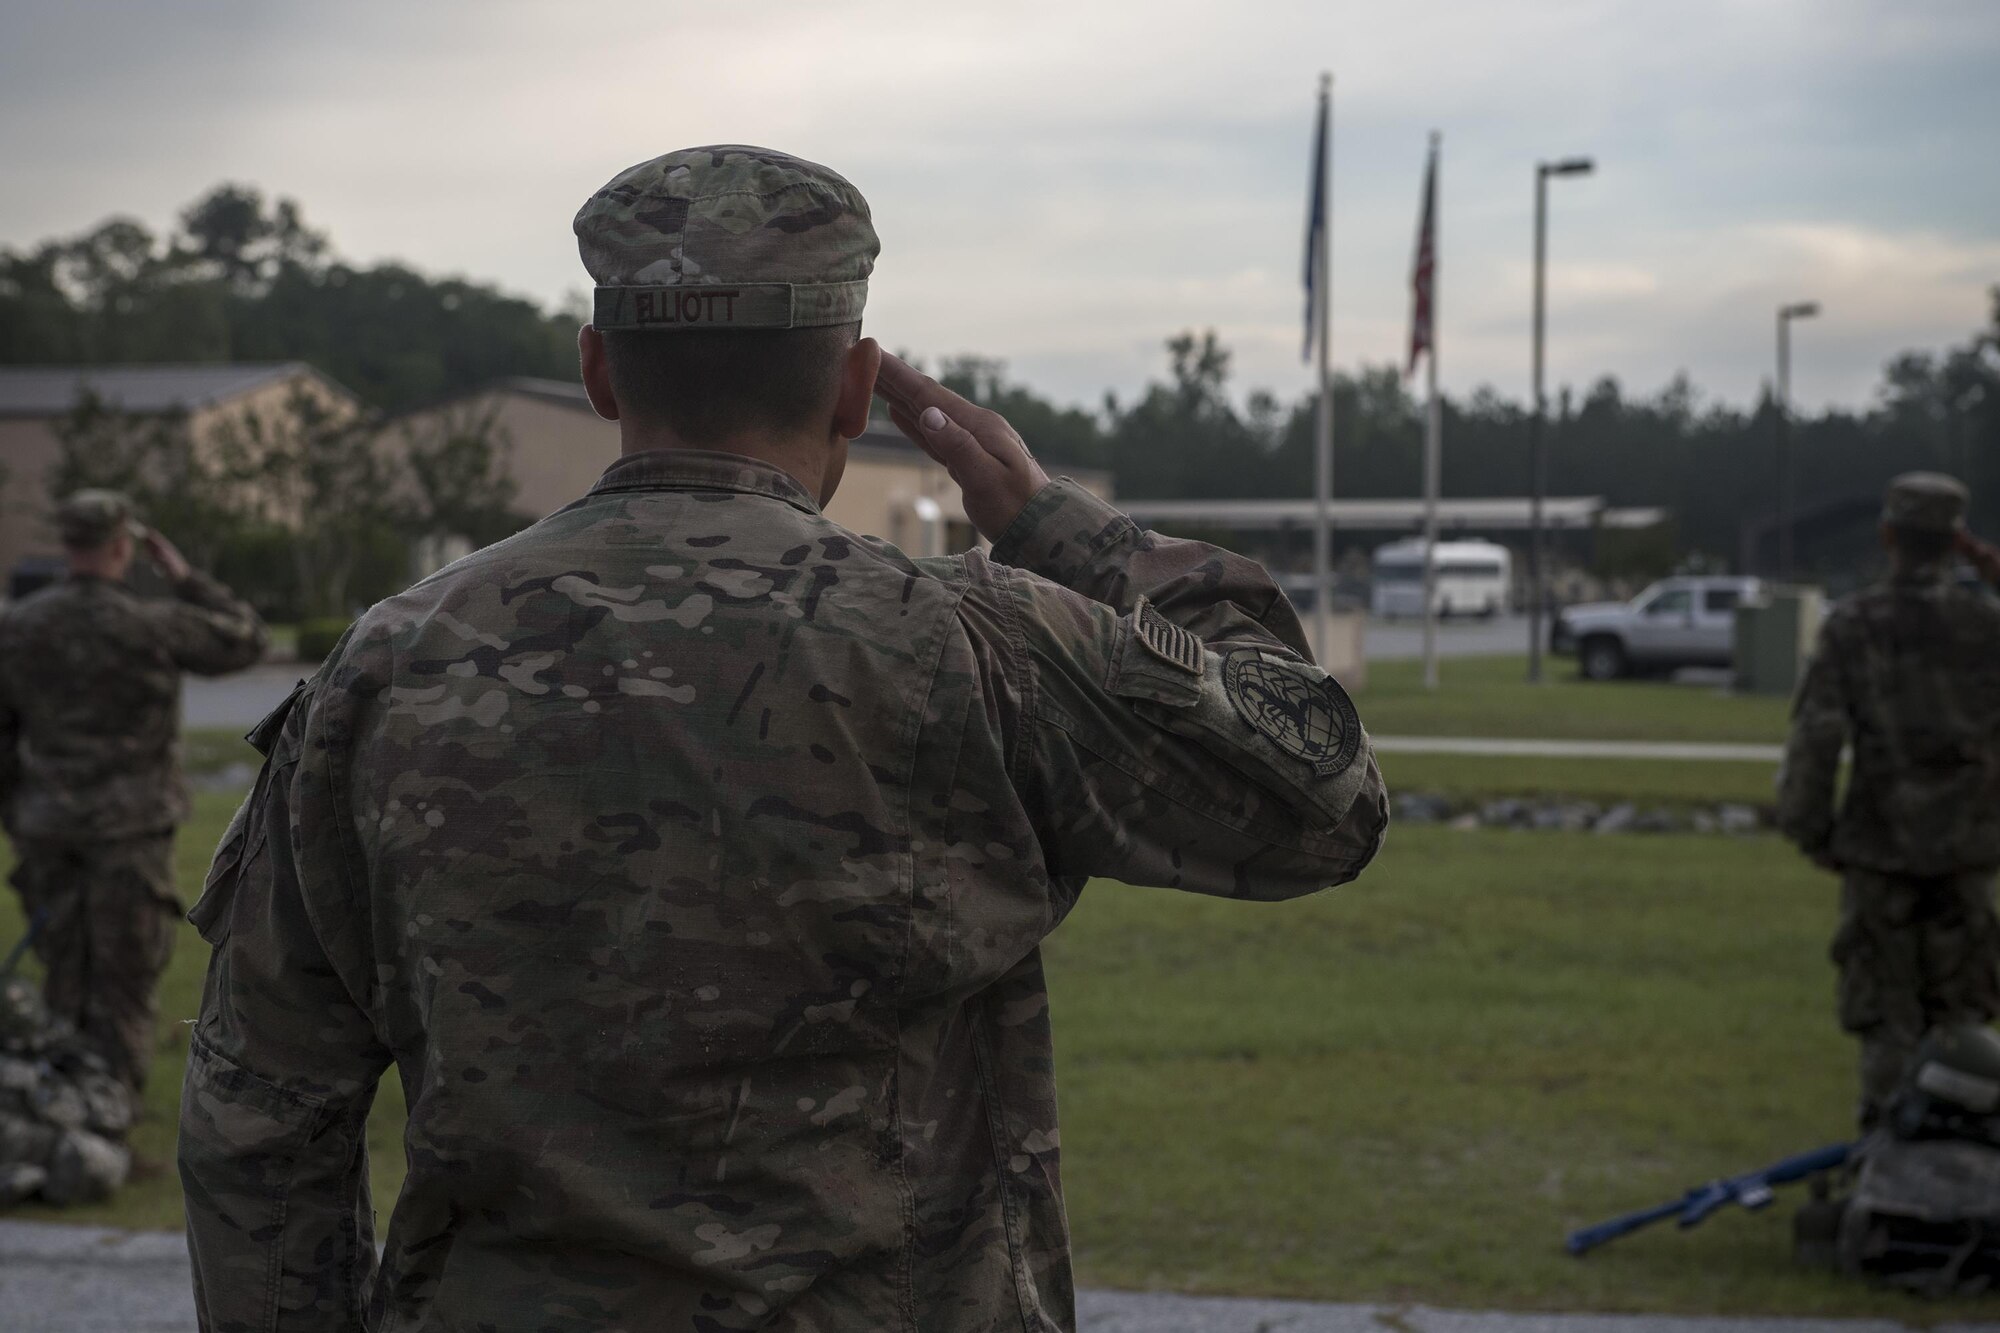 Staff Sgt. Christopher Elliot, 822nd Base Defense Squadron fire team leader, salutes during reveille before completing the last task for an Army Air Assault assessment, May 19, 2017, at Moody Air Force Base, Ga. Twenty-six Airmen attended the assessment which measured candidates’ aptitude in Air Assault operations, completion of equipment layouts, and rappelling. (U.S. Air Force photo by Tech. Sgt. Zachary Wolf)